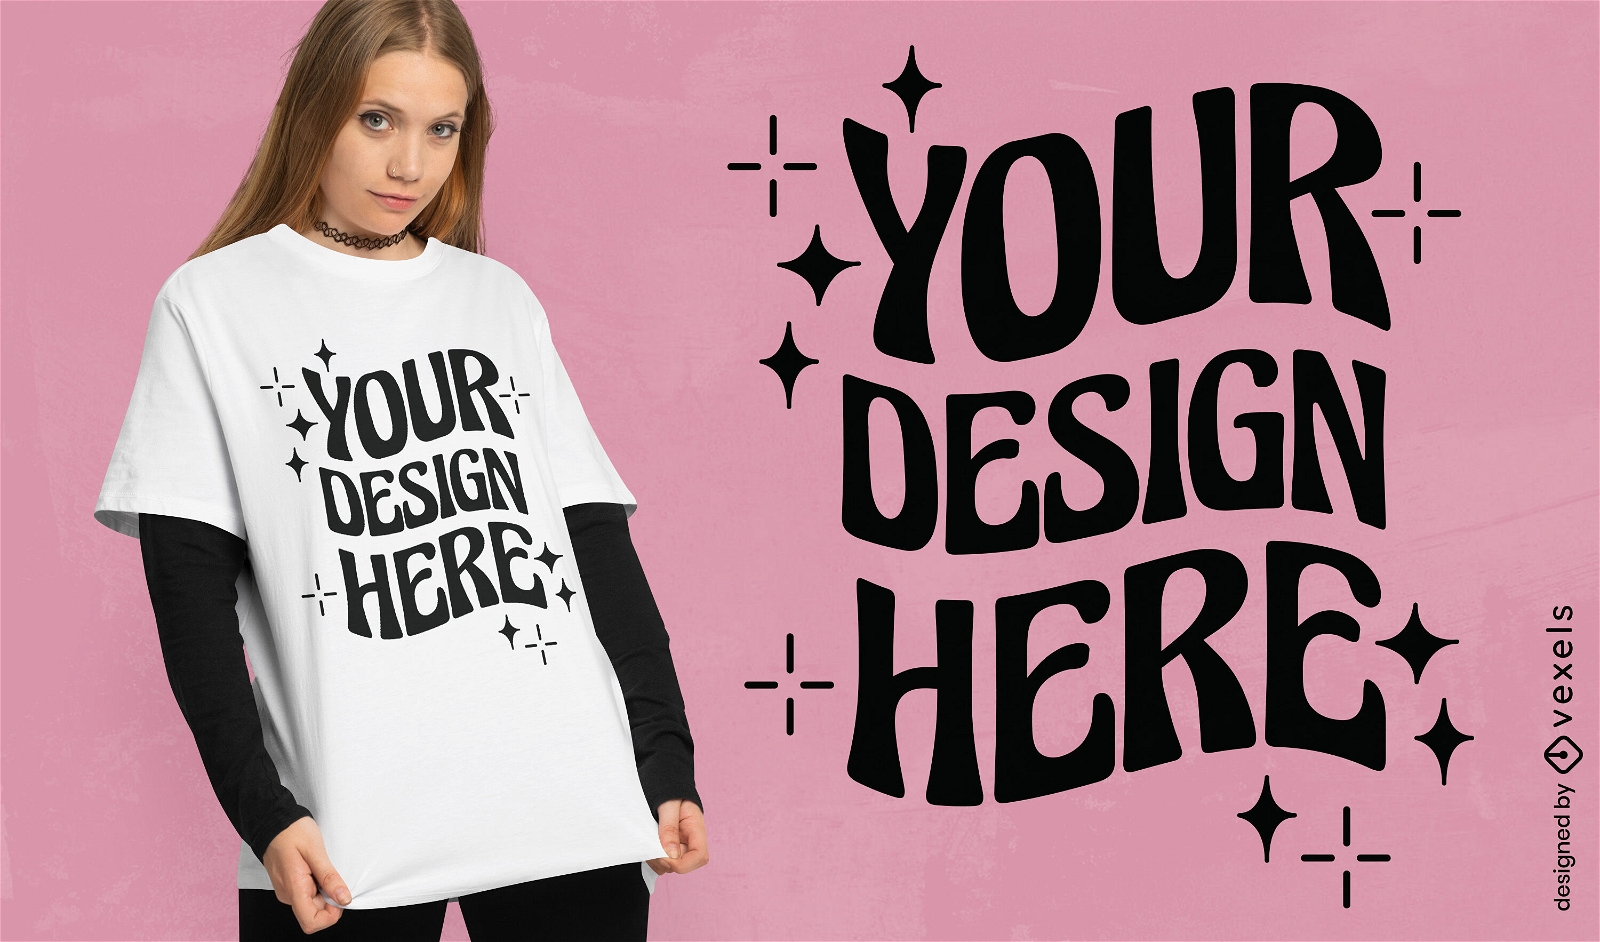 Lettering quote template t-shirt design